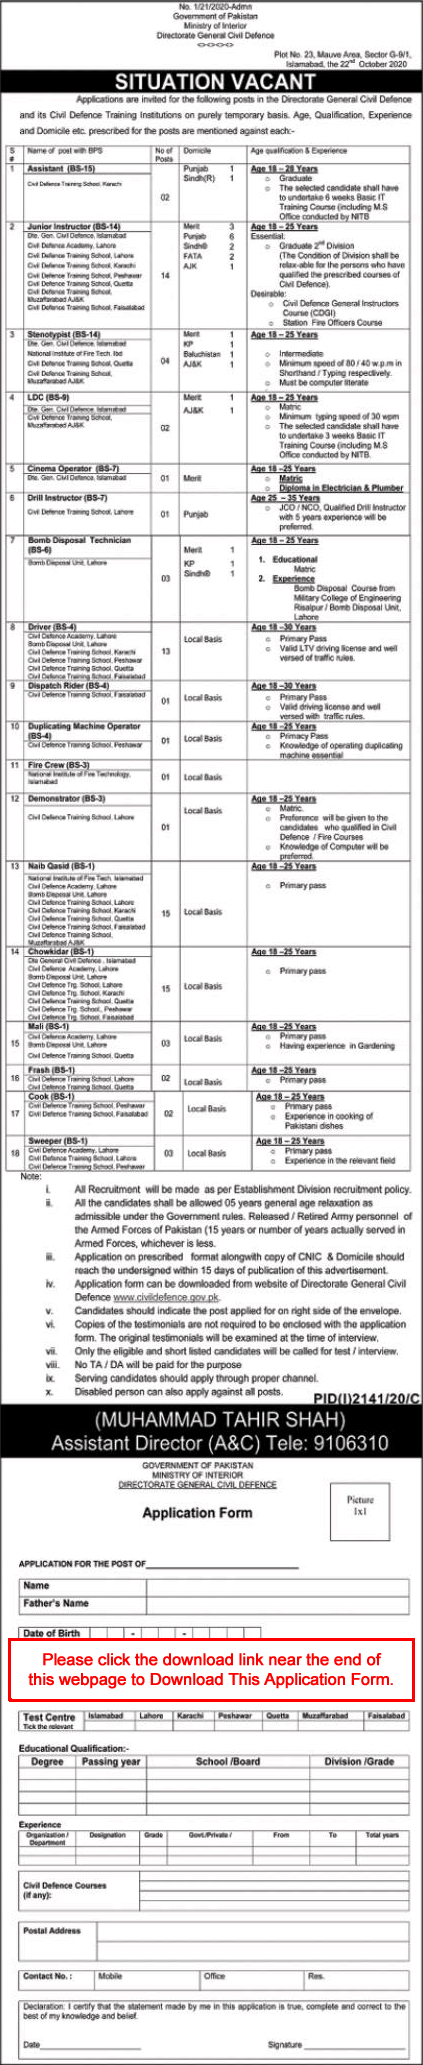 Ministry of Interior Jobs 2020 October Application Form Naib Qasid, Chowkidar, Instructors & Others Latest